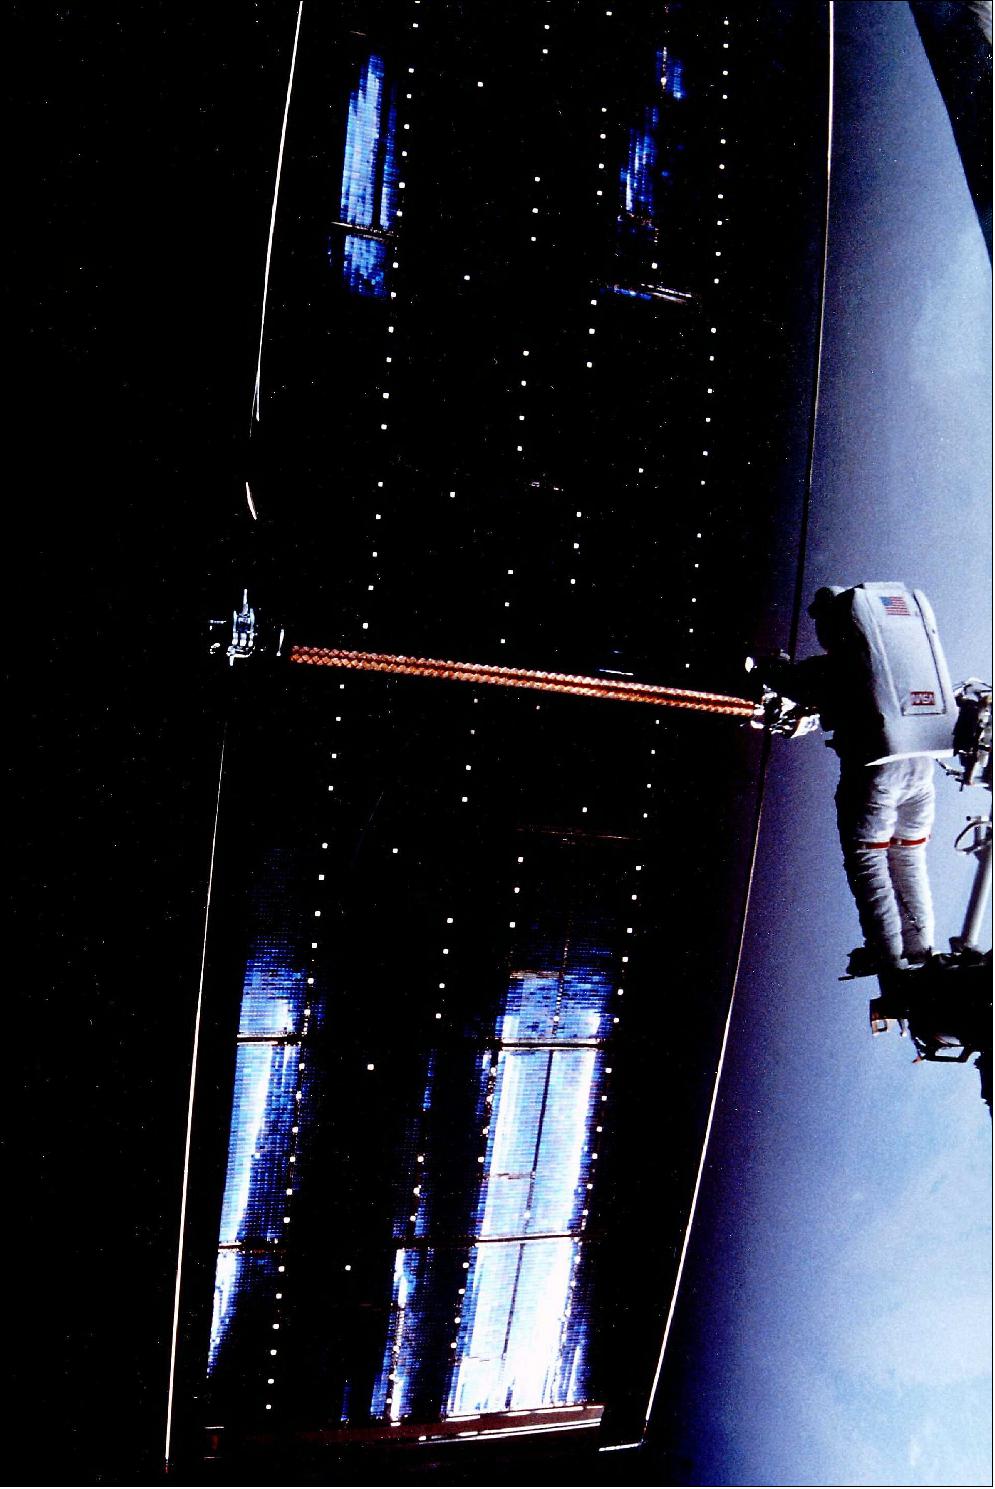 Figure 63: Astronaut Kathy Thornton threw the damaged Hubble array into free space once it became clear its failed compensation mechanism had bent it into a bow-like shape, making refurling for return to Earth at the end of STS-61 on Servicing Mission in December 1993 impossible (image credit: NASA)